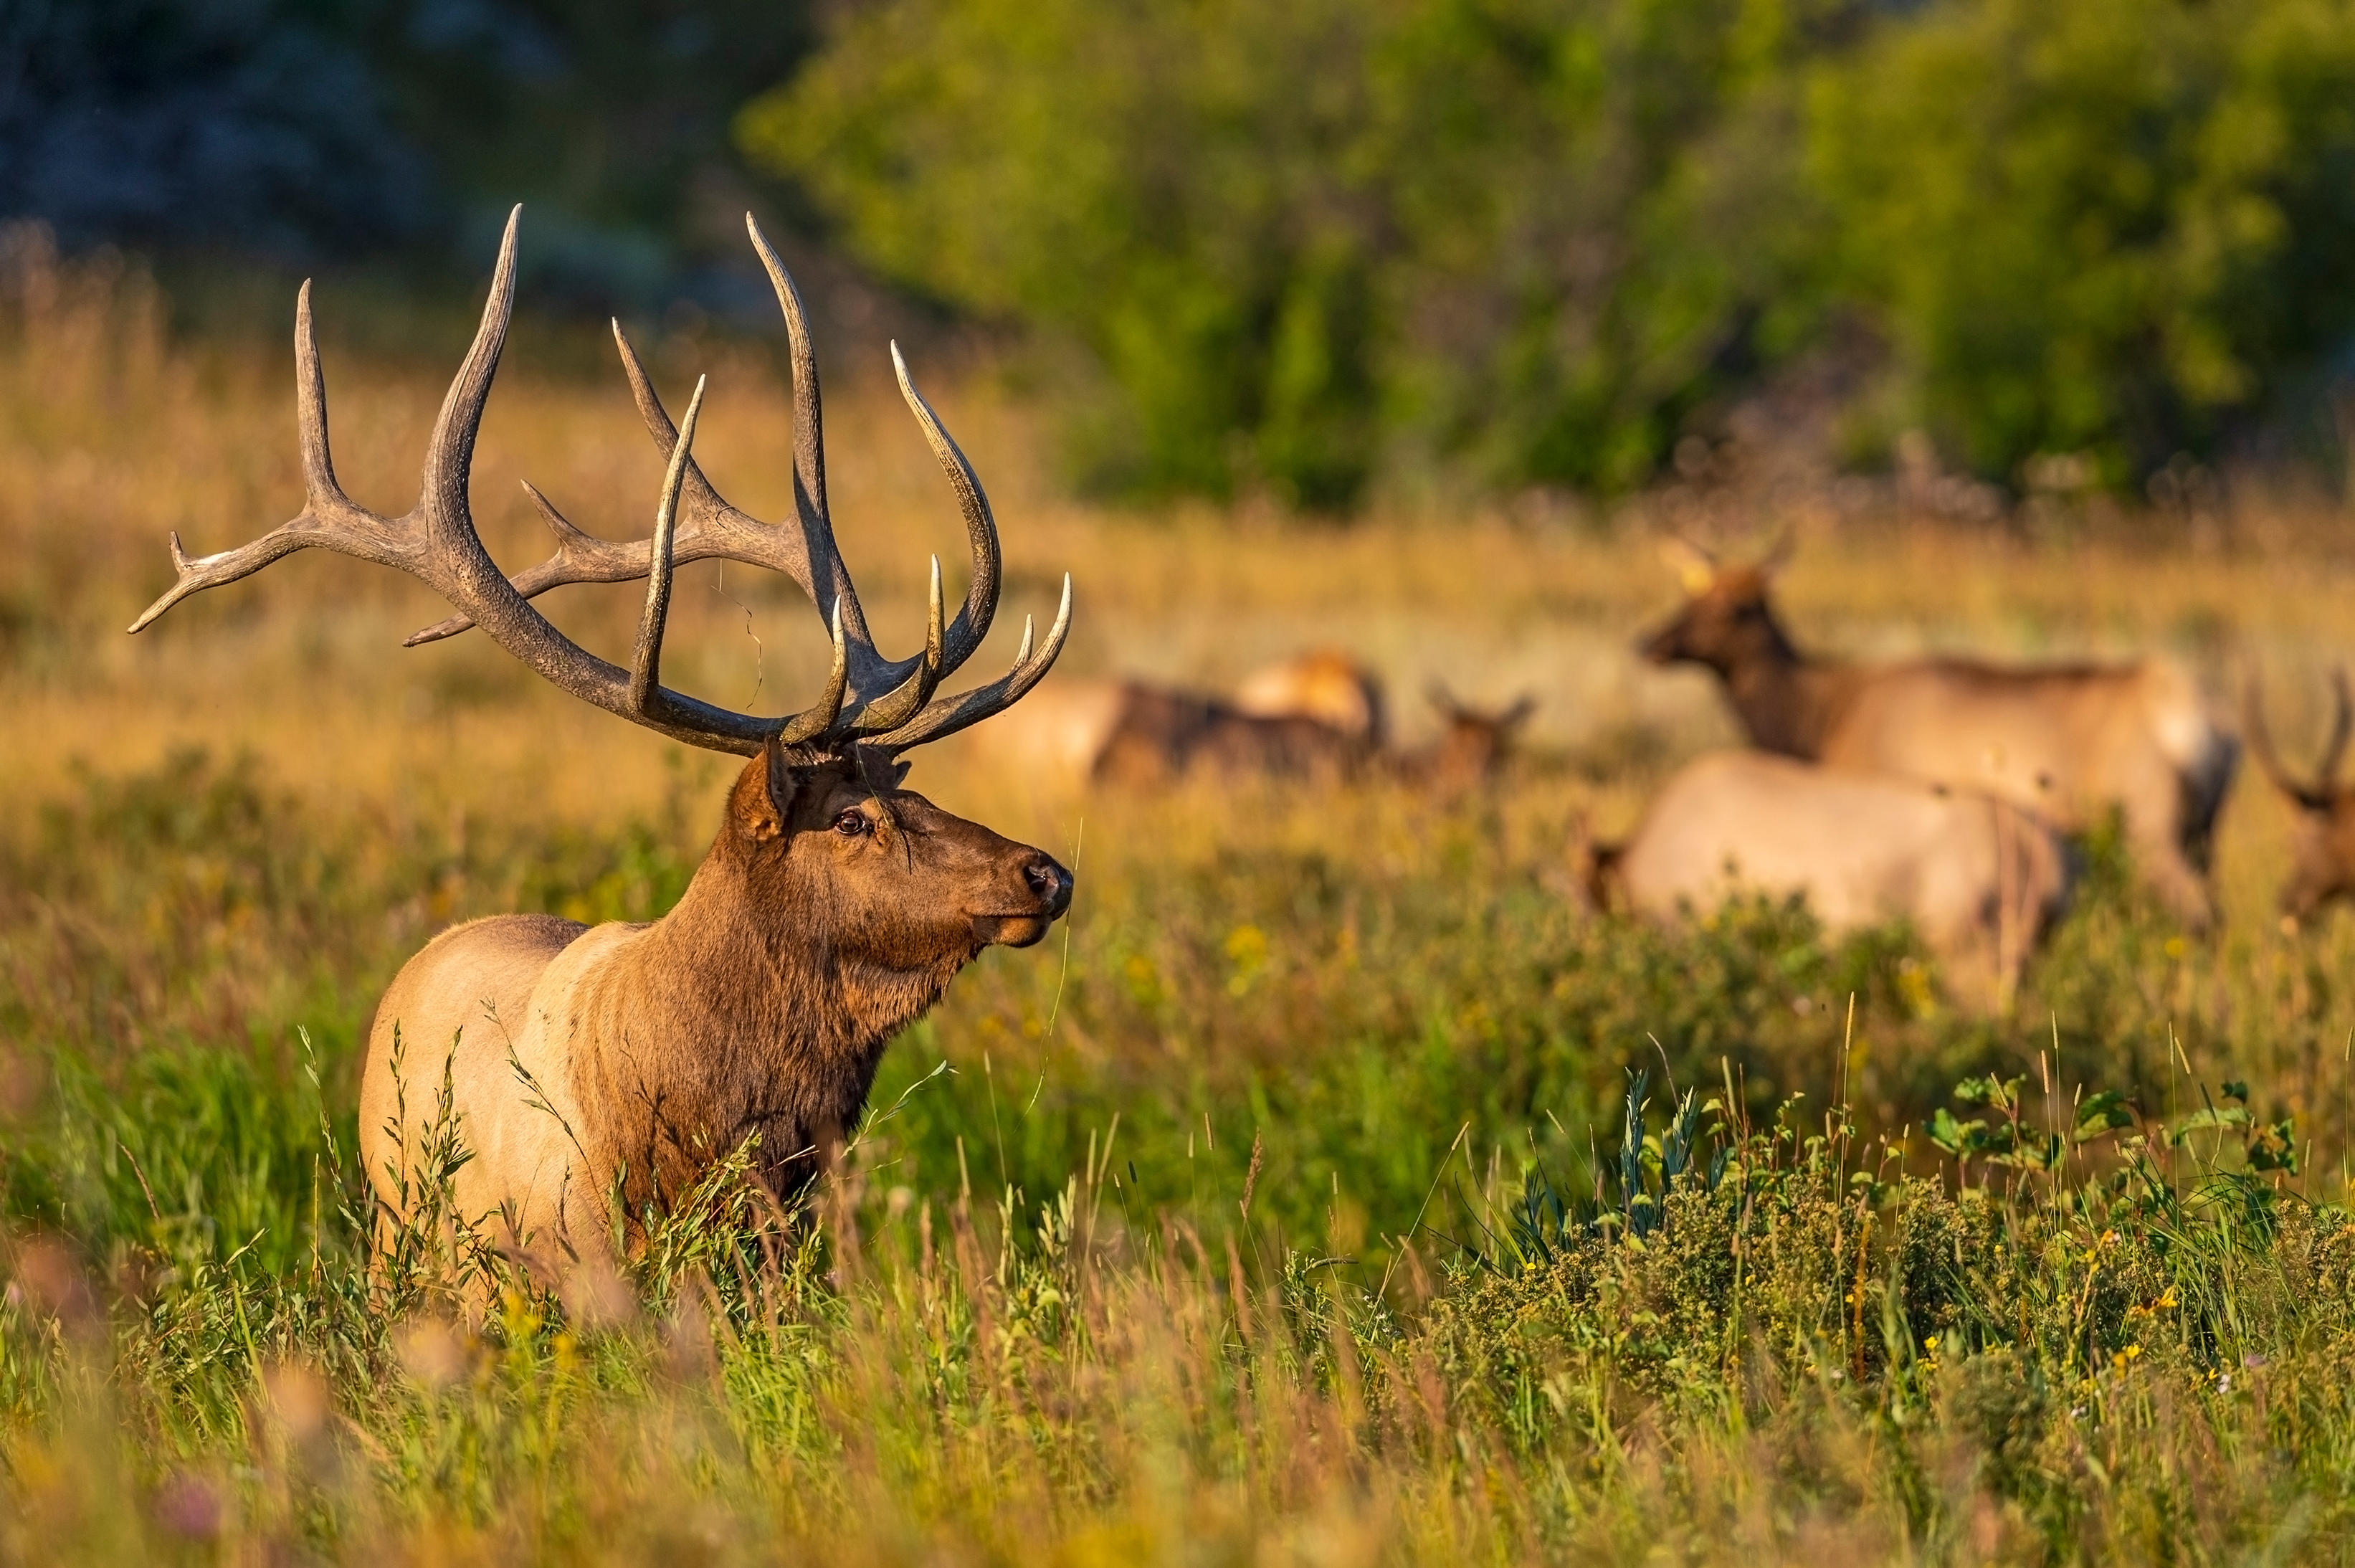 Bull elk referred to as "Kahuna," taken fall of 2021 is owned by Dawn Wilson Photography. The NPS has been granted its limited use in print and digital media solely for this article.